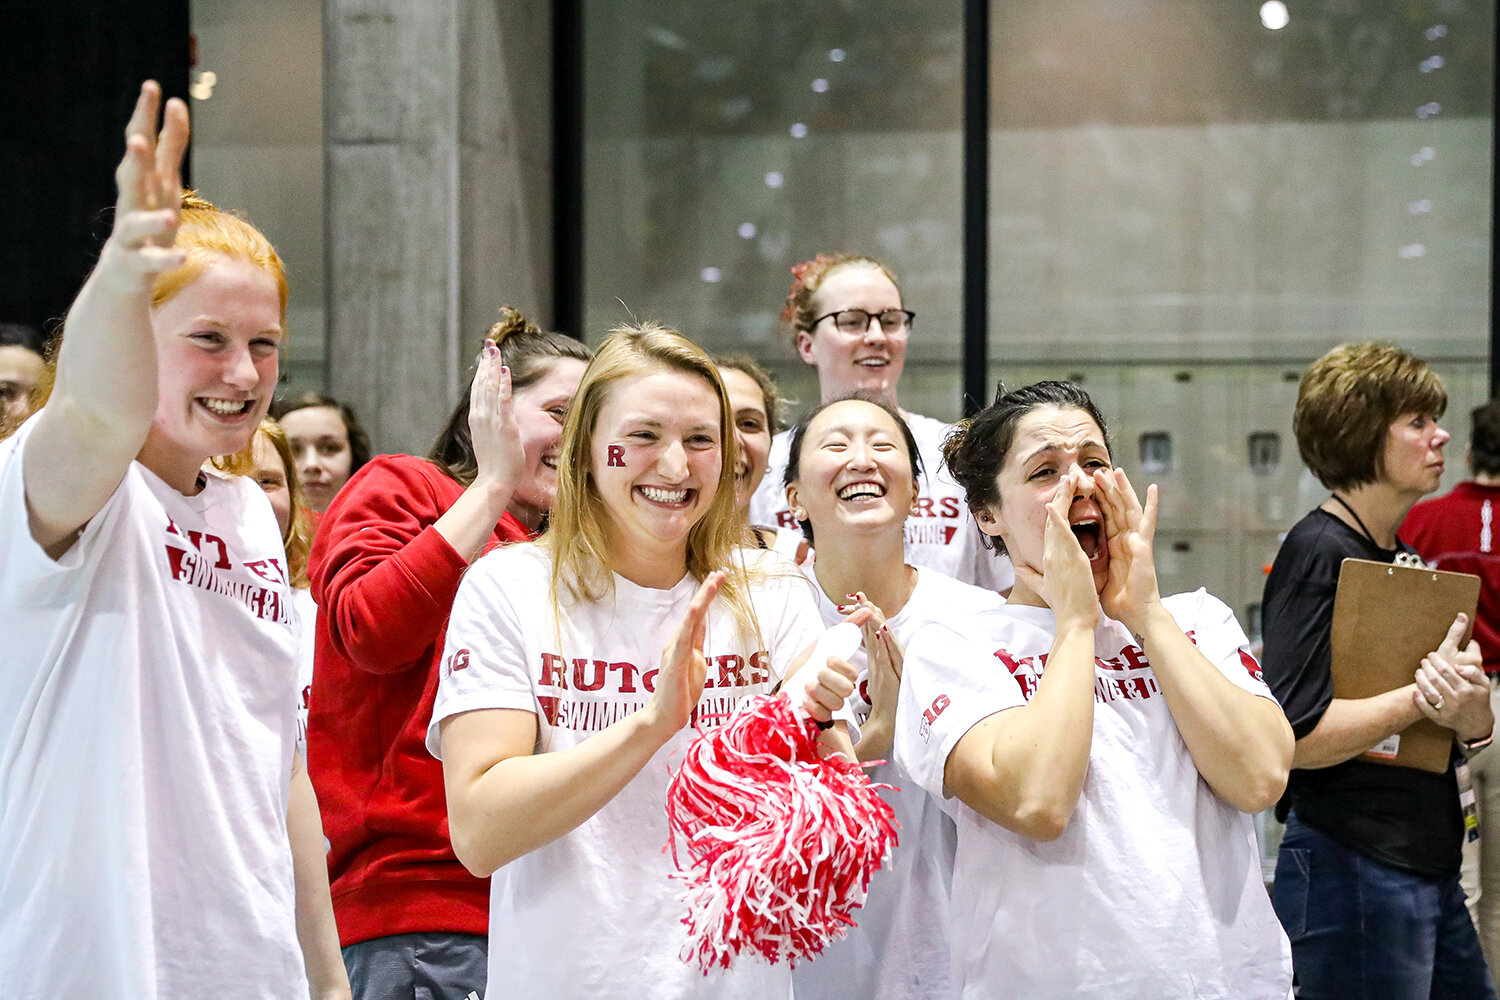  The Rutgers swim team cheers for Tereza Grusova after she took second place in the 100 Yard Backstroke during the Big Ten Women’s Swimming and Diving Championships at the Campus Welfare and Recreation Center in Iowa City, IA on Friday, Feb. 21, 2020